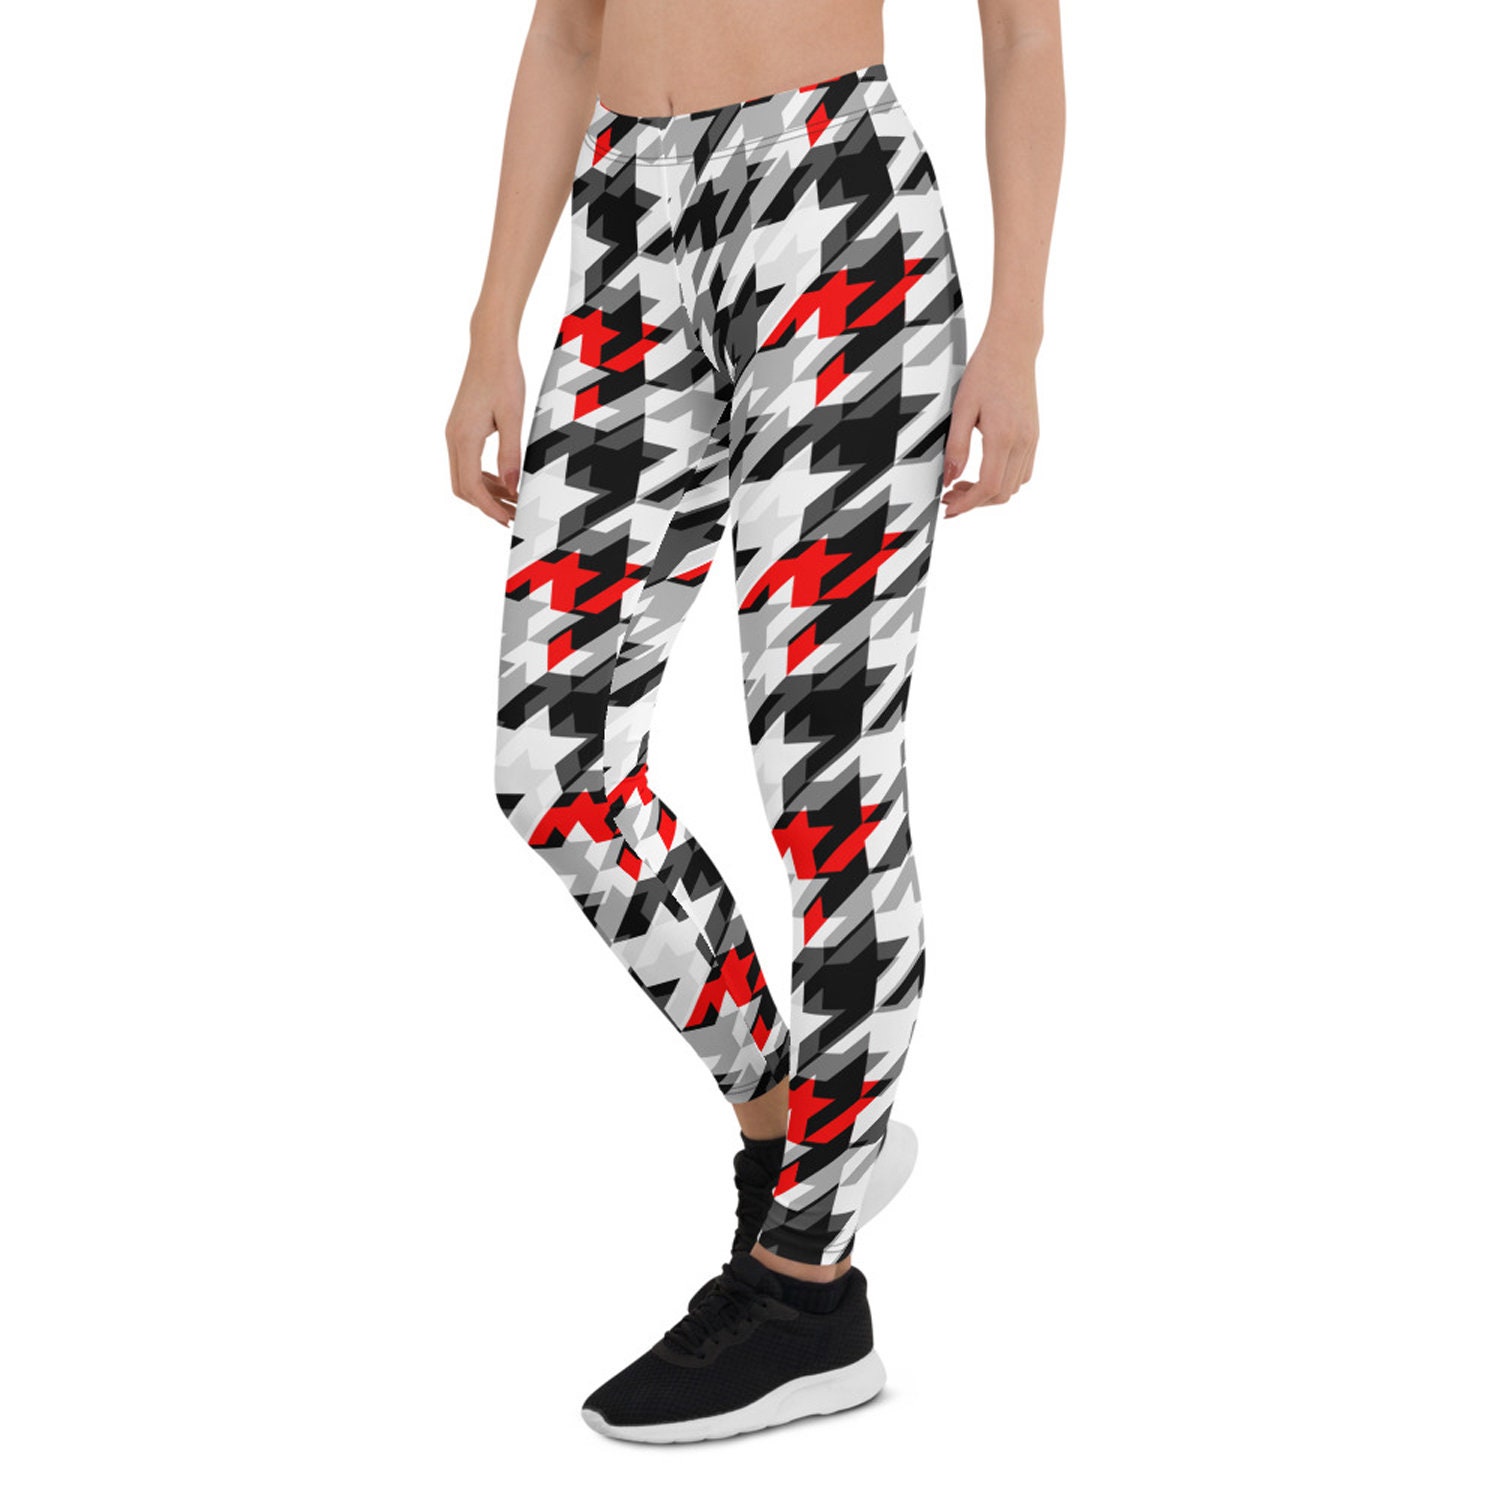 Houndstooth Sports Leggings for Women Printed Hounds Tooth Pattern in  Black, White, Gray, Red Check Pattern Perfect Dressy Workout Gym Pants 